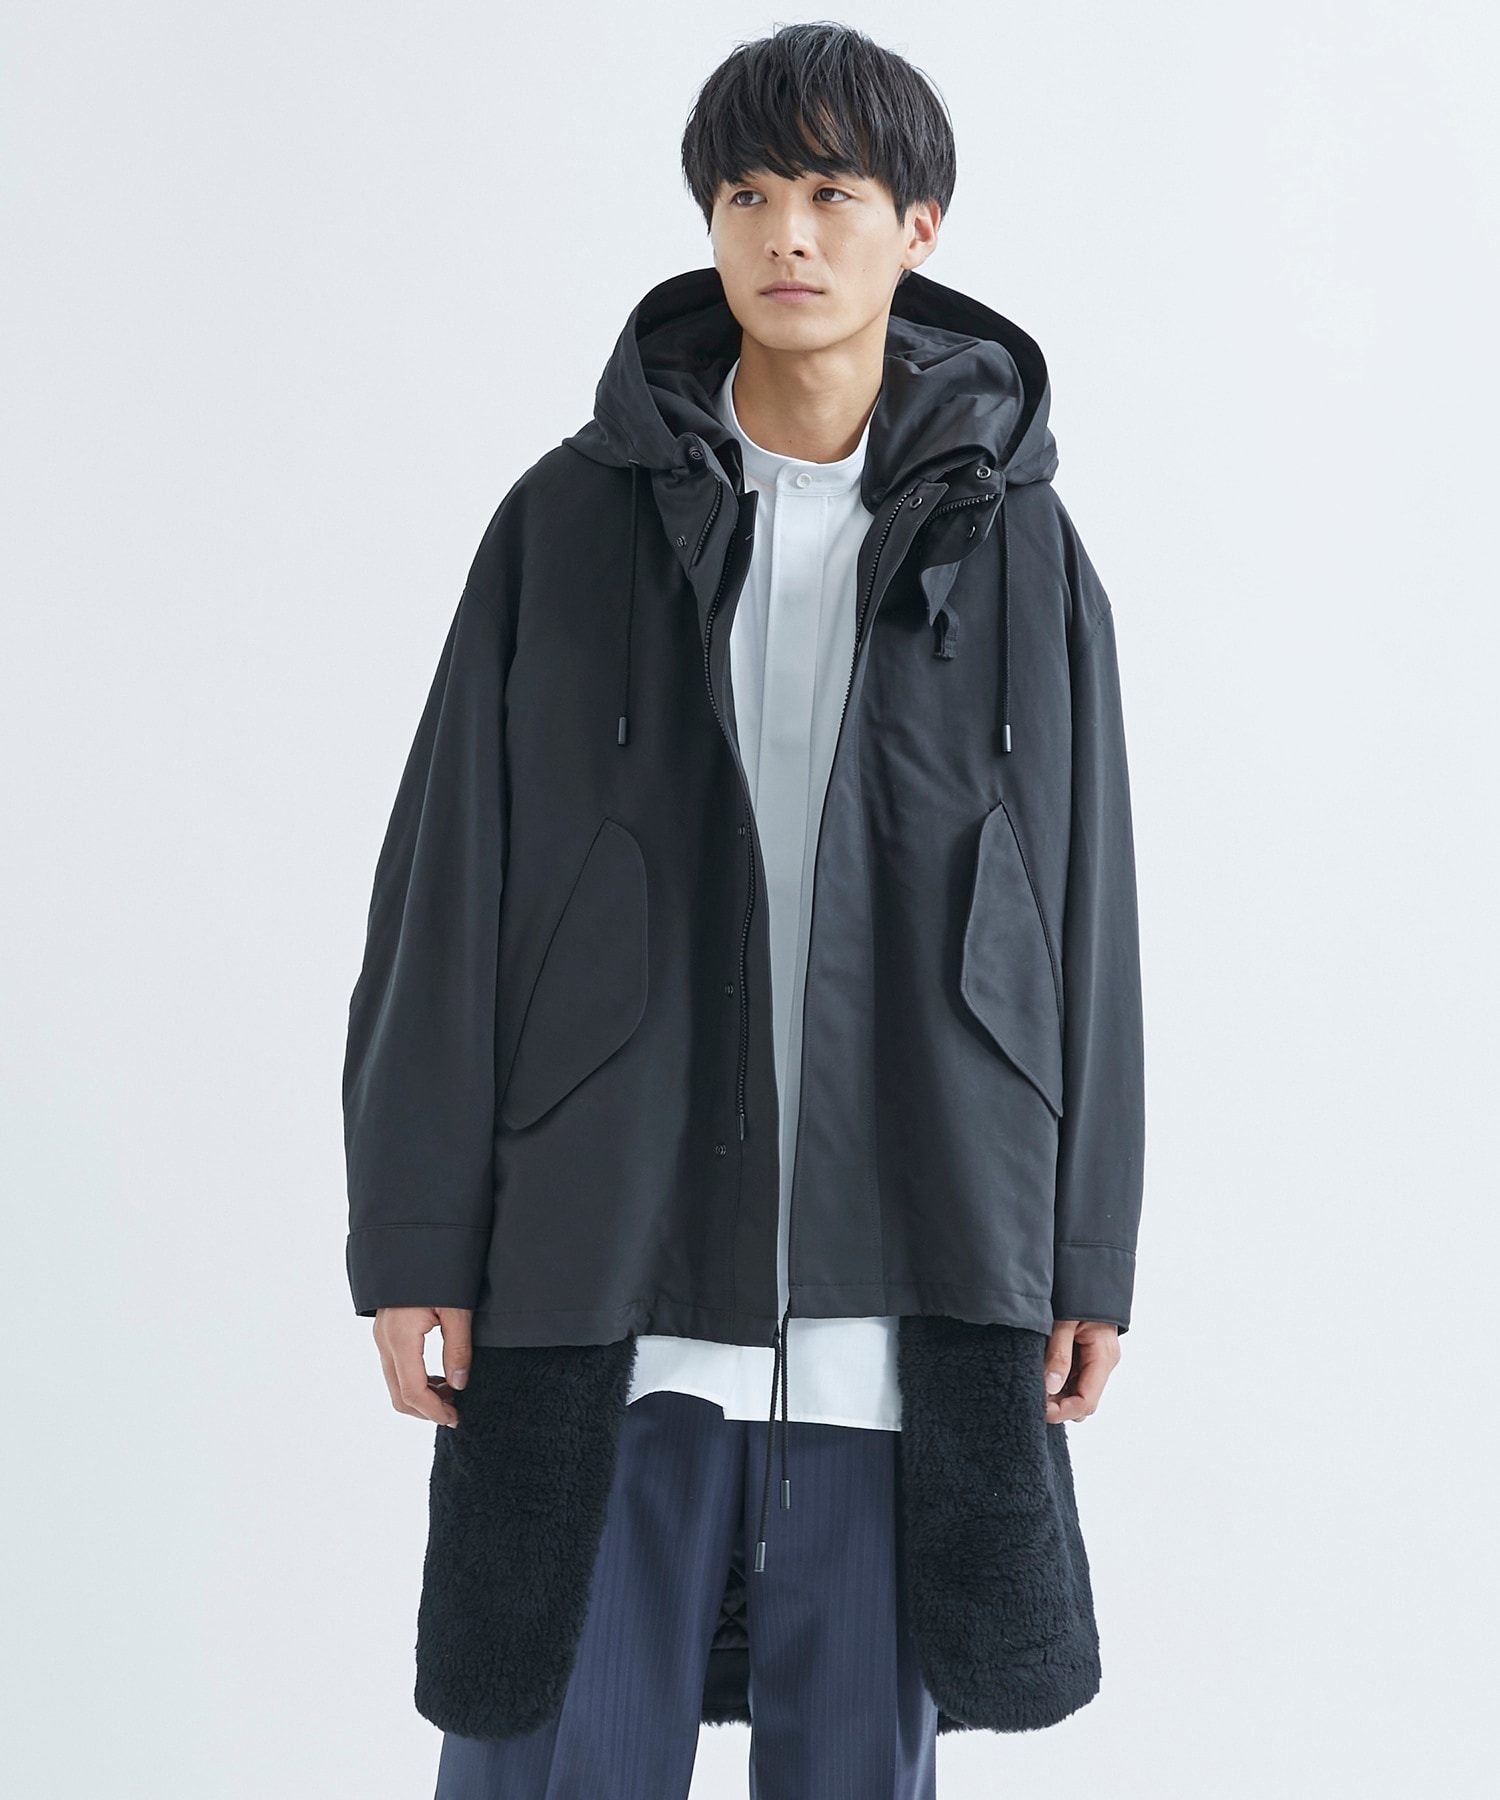 THE MODS COAT WITH LINER